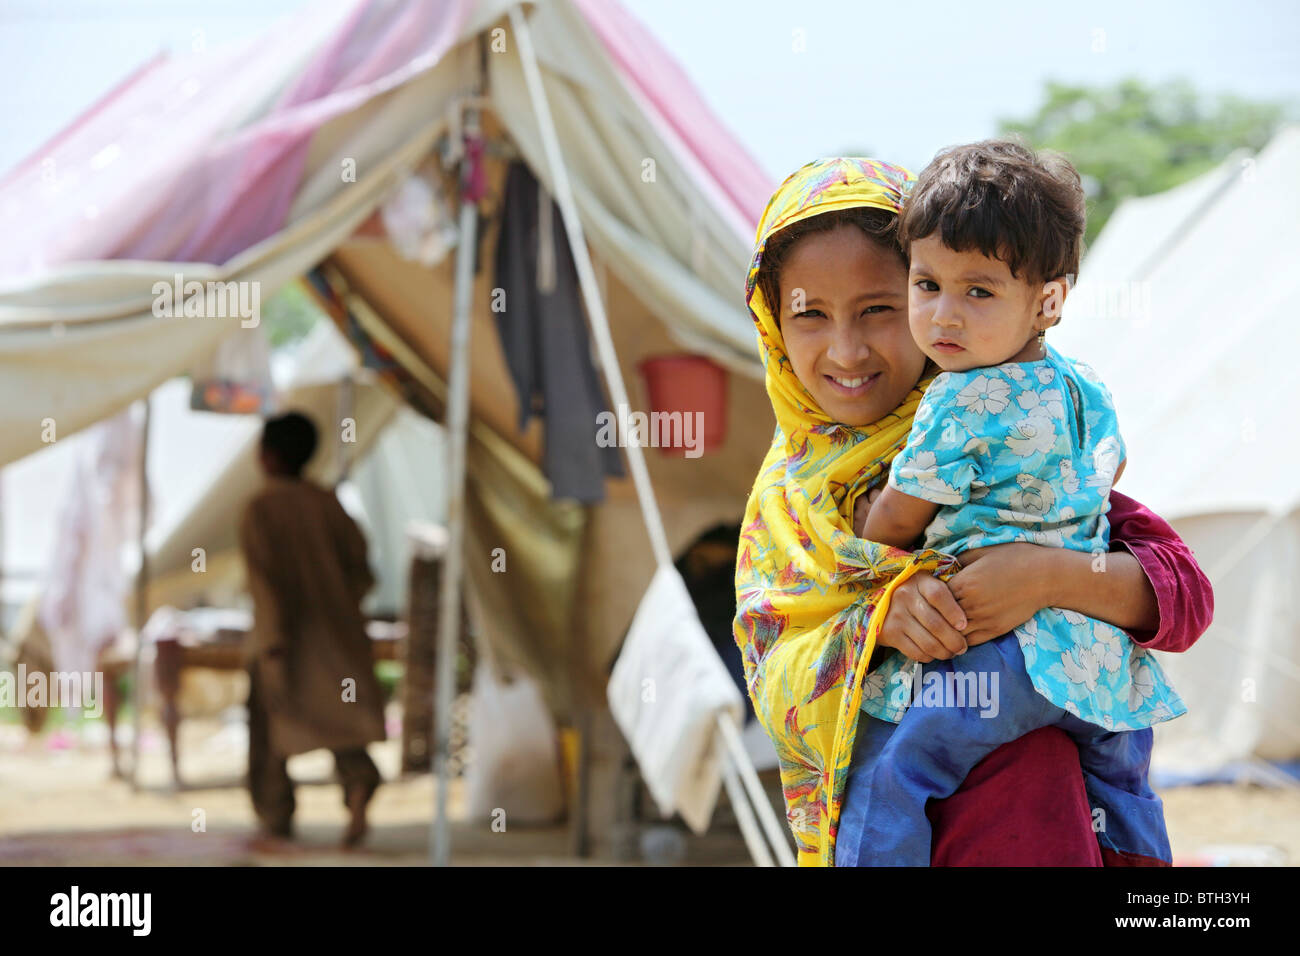 A mother and child in a refugee camp after a flood disaster, Charsadda, Pakistan Stock Photo